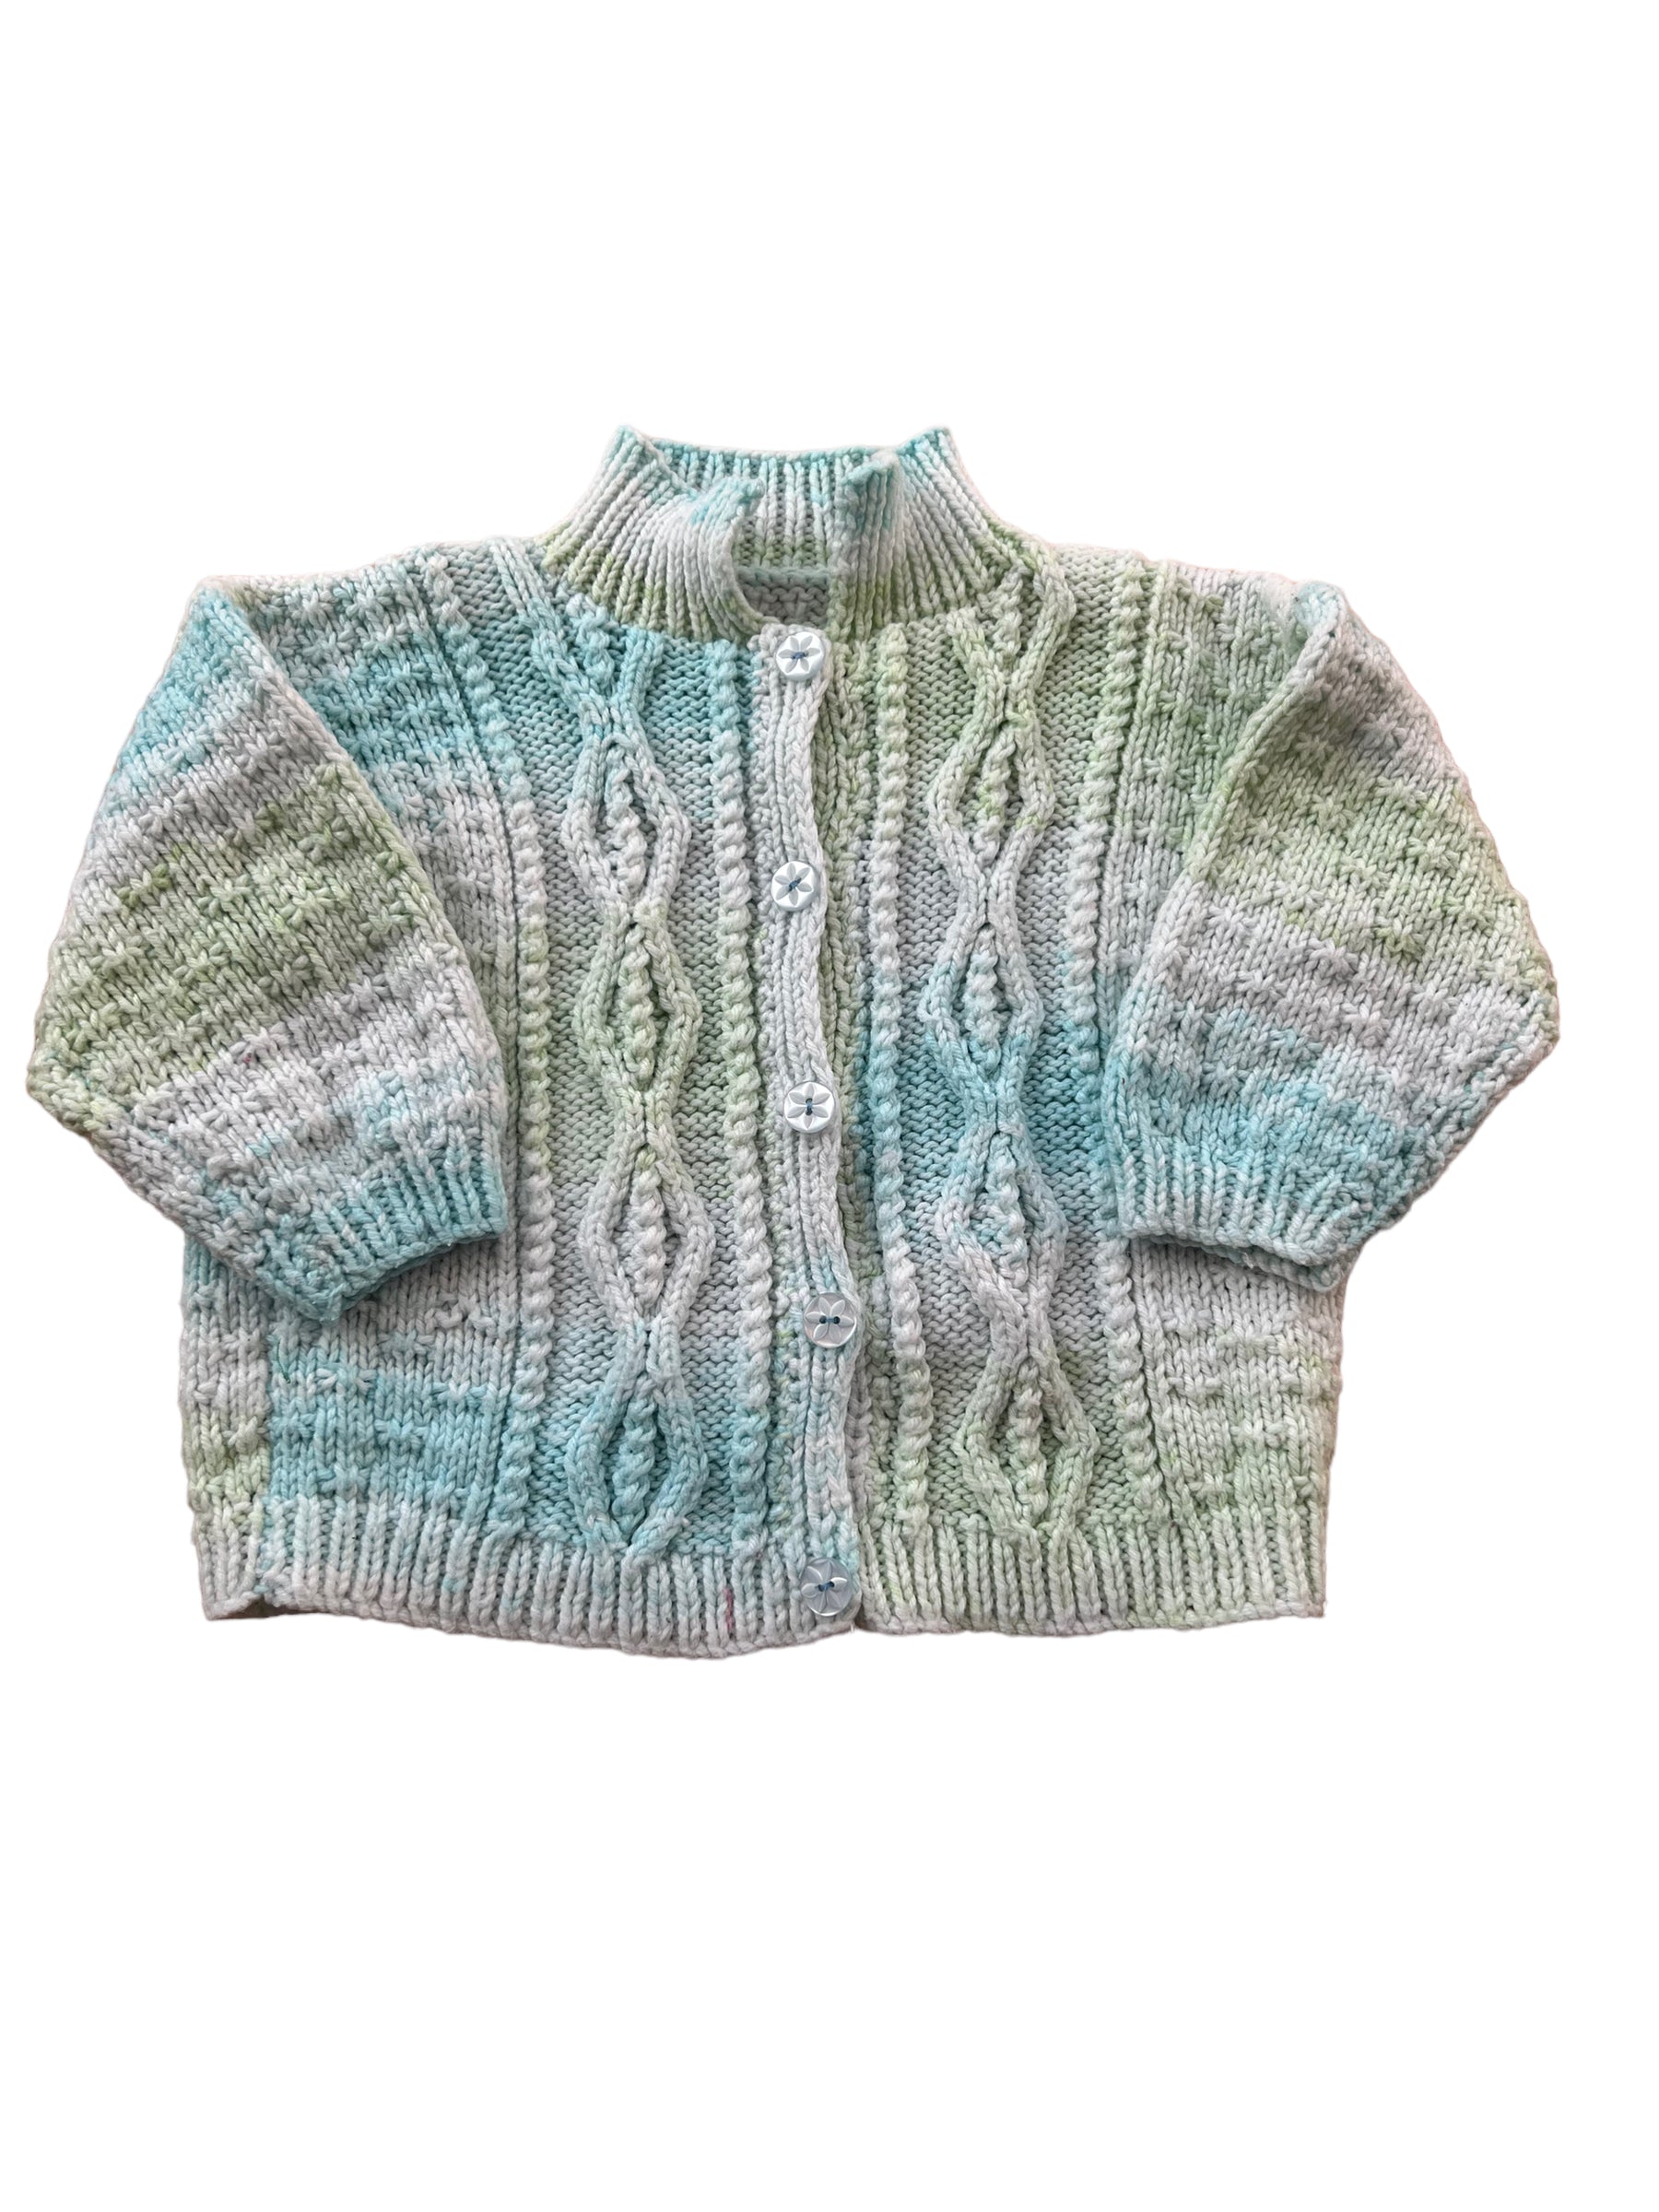 Handmade Ombre Knit Baby Cardigan